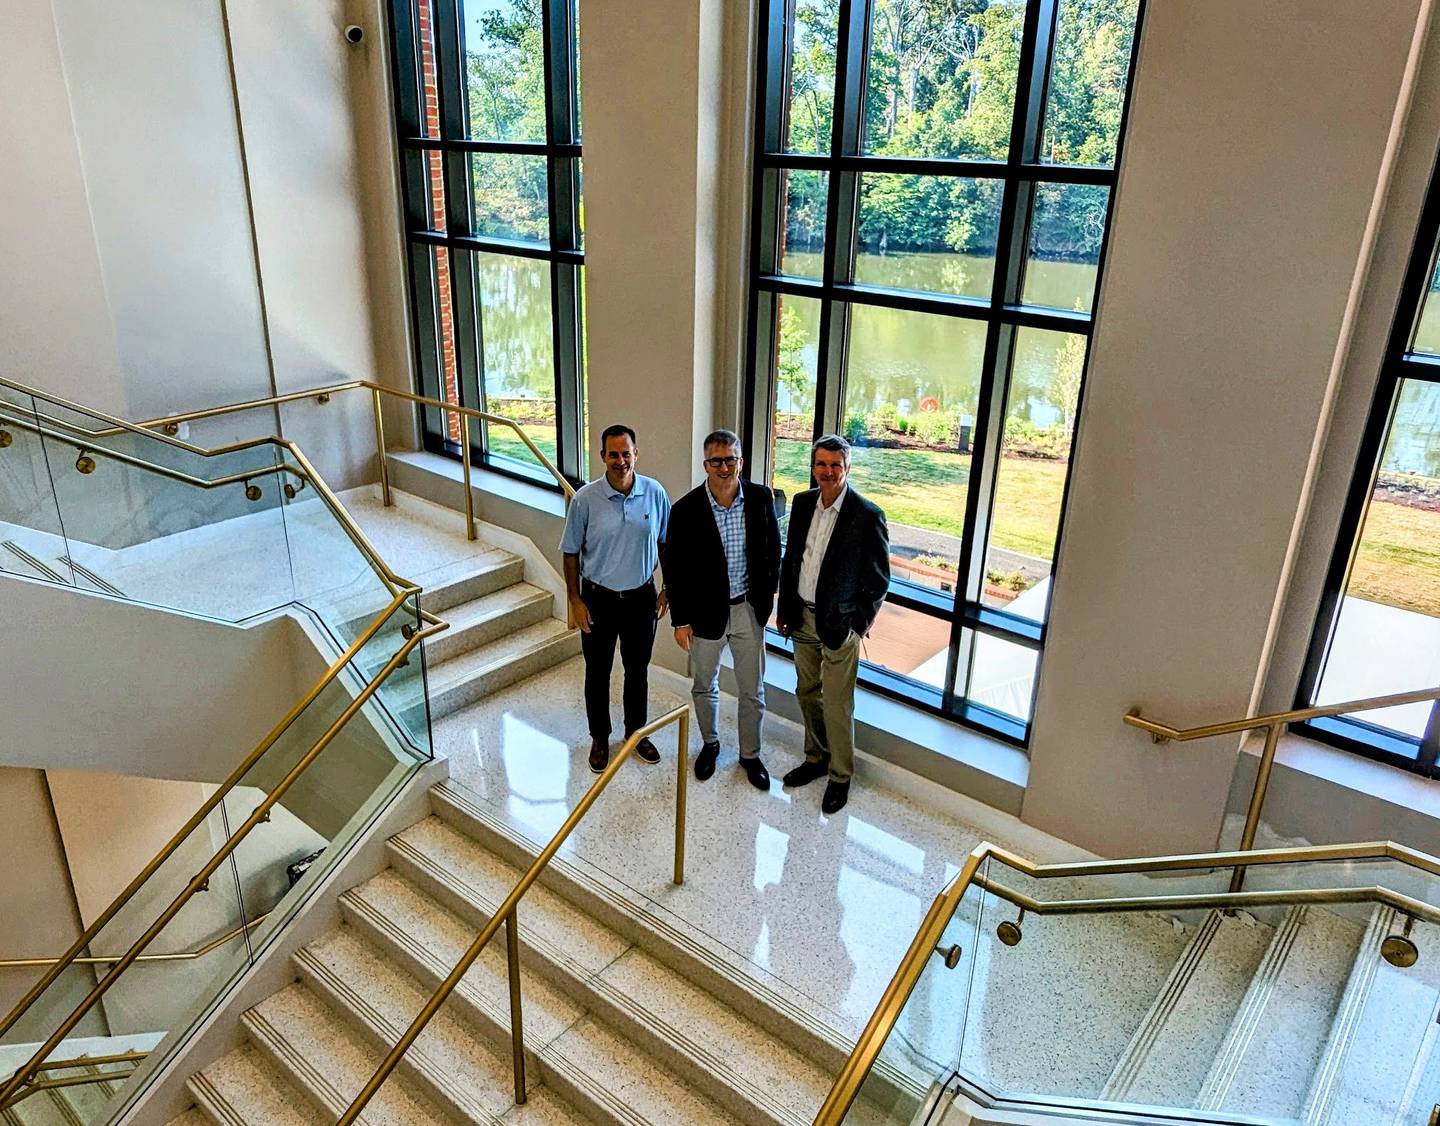 Jeff Webb, CEO of the Naval Academy Alumni Association & Foundation stands in the main stairwell of the new Fluegel Alumni Center with, left, Executive Vice Presidents Thomas Grady and, right, Bob O'Connor.